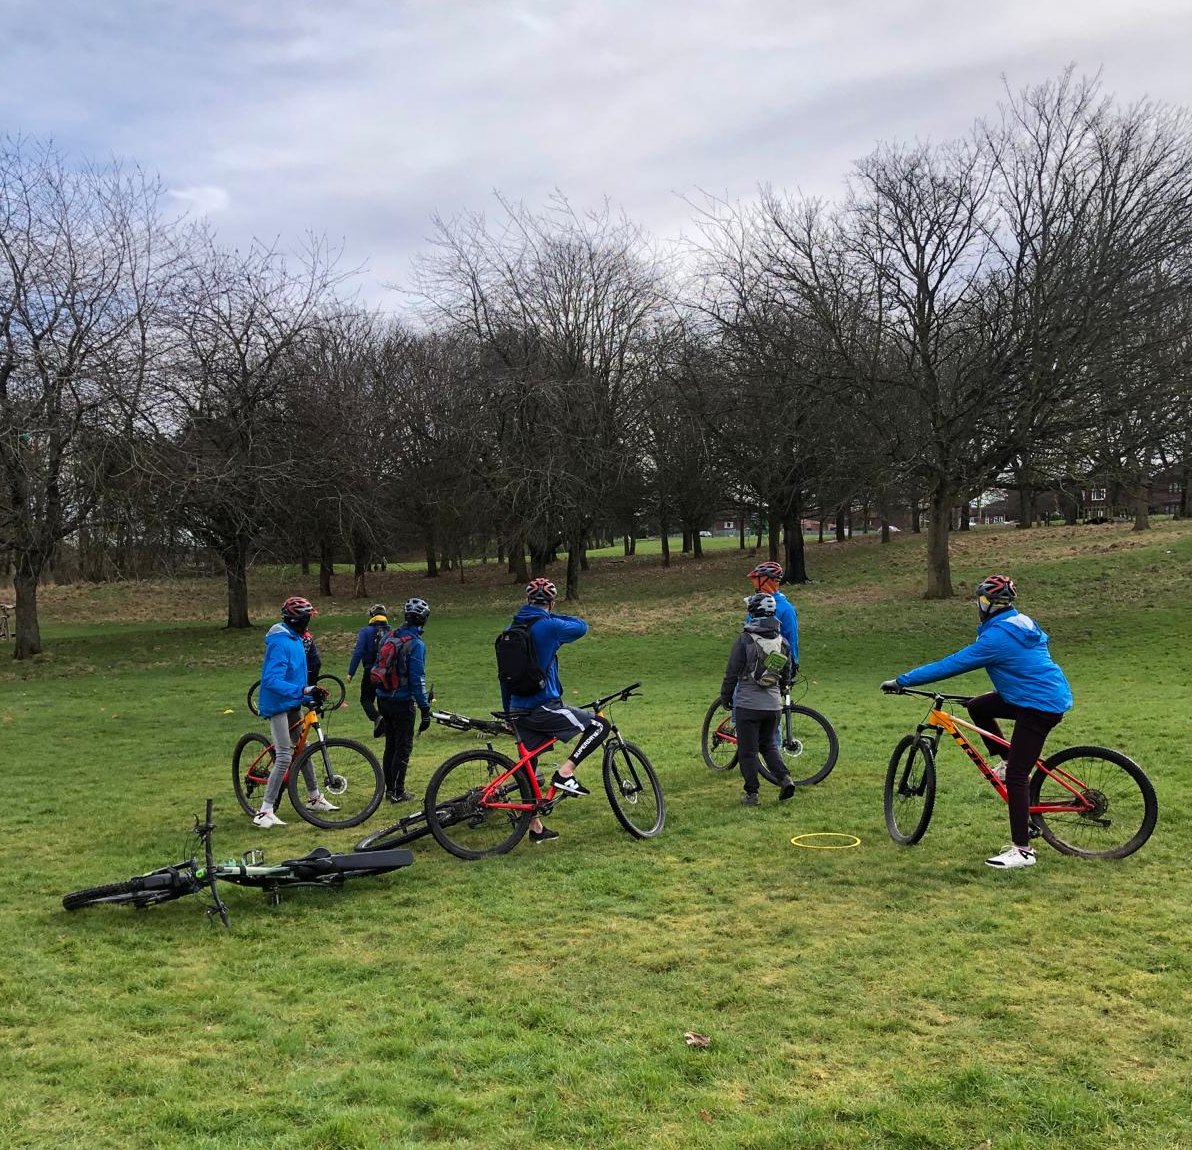 Our Inspire Project team organised a bike-ride trail therapy taster session for a group of asylum seekers in Dundee. It's amazing how exercise and fresh air can improve mental and physical well-being. Huge thanks to @ScottishCycling for making it possible! #NewScots